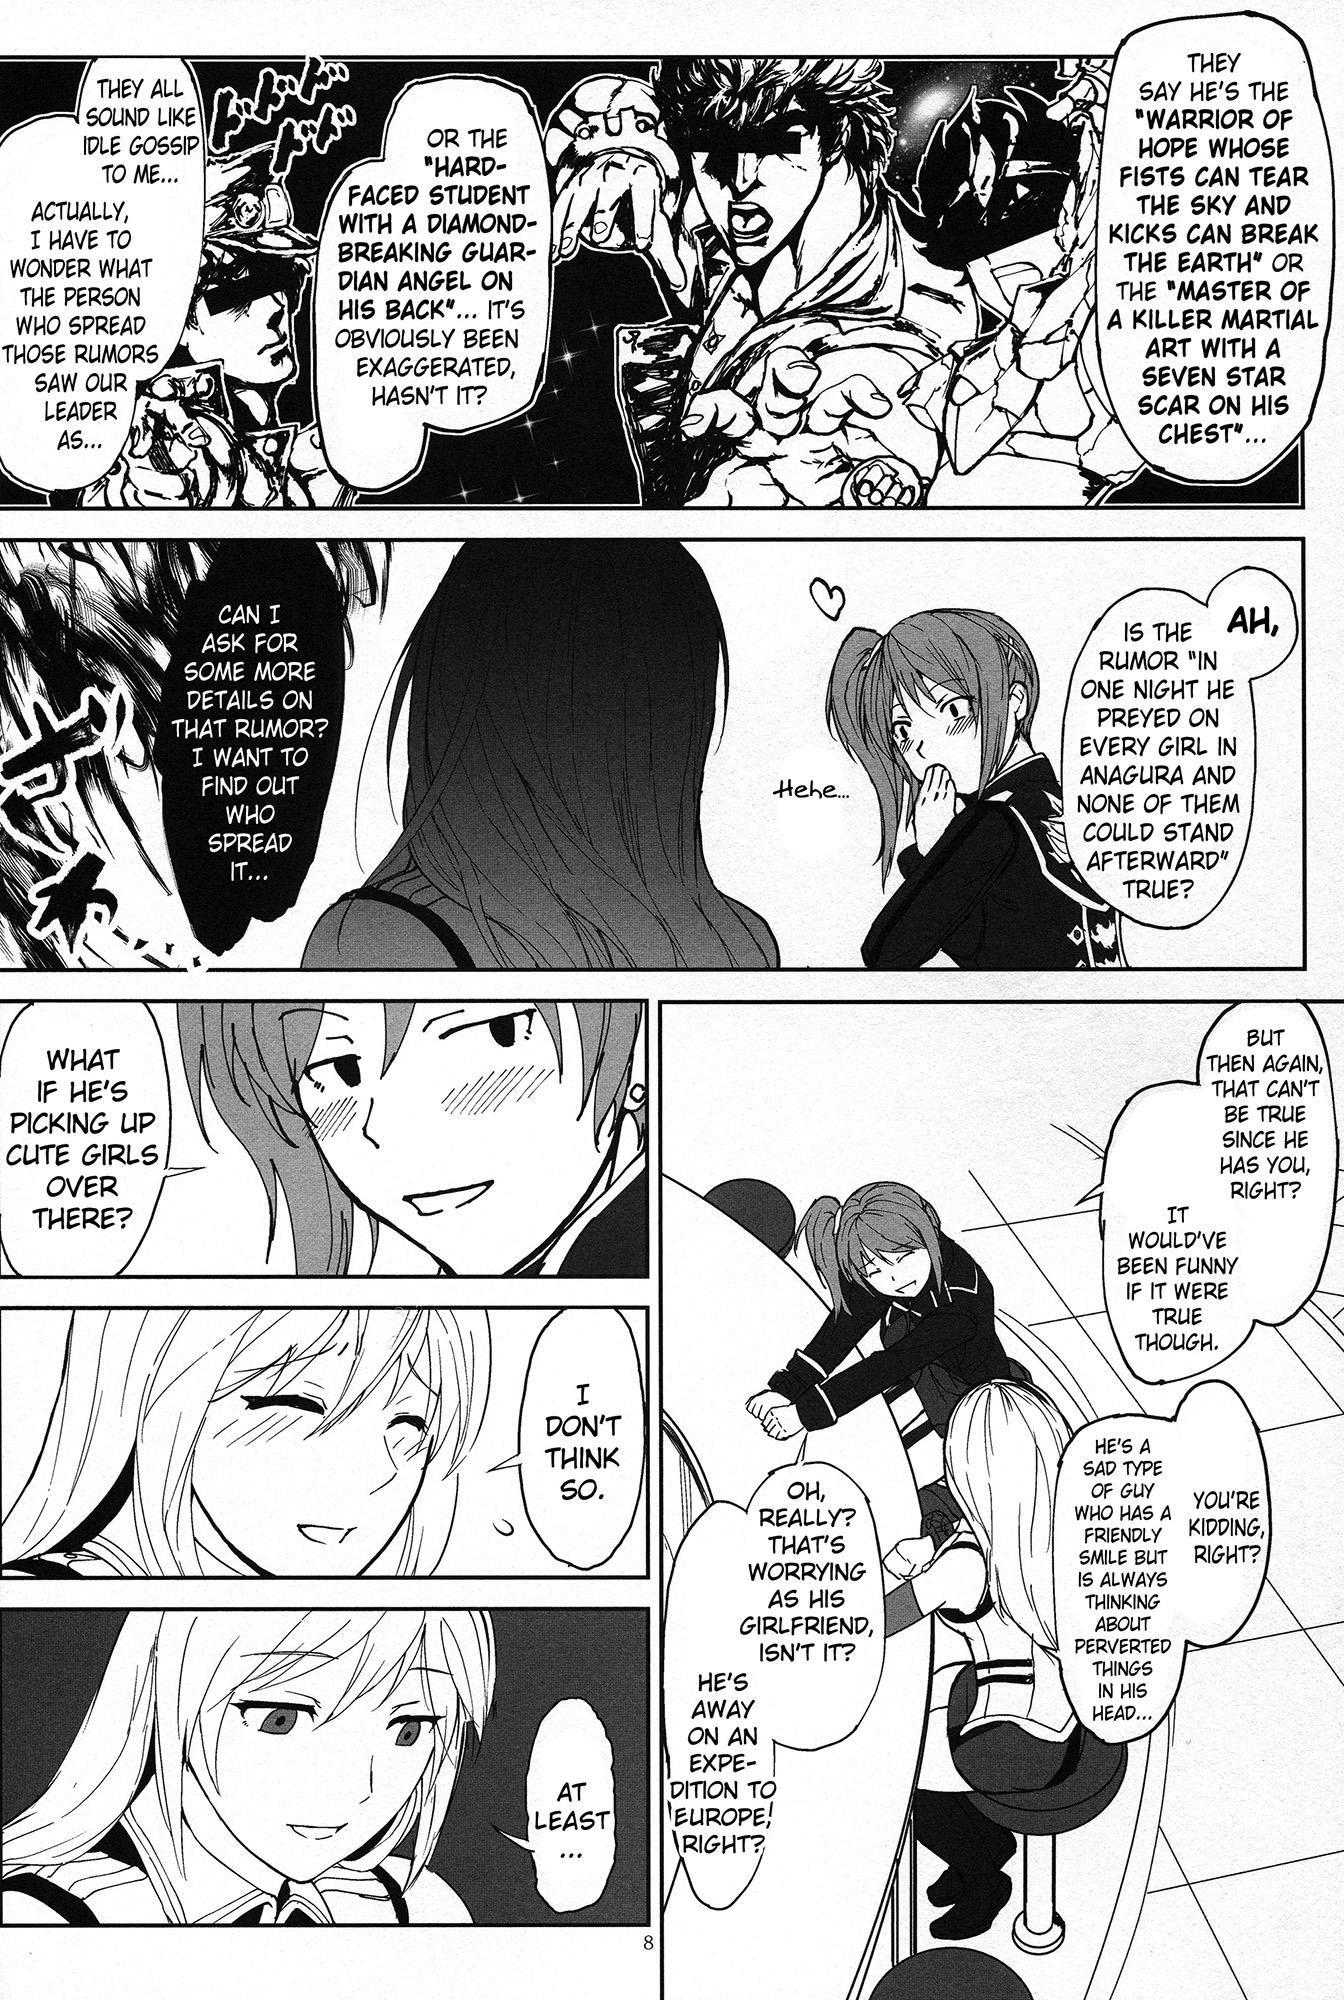 Con Again #2 "Flashback Memories" - God eater Movie - Page 7